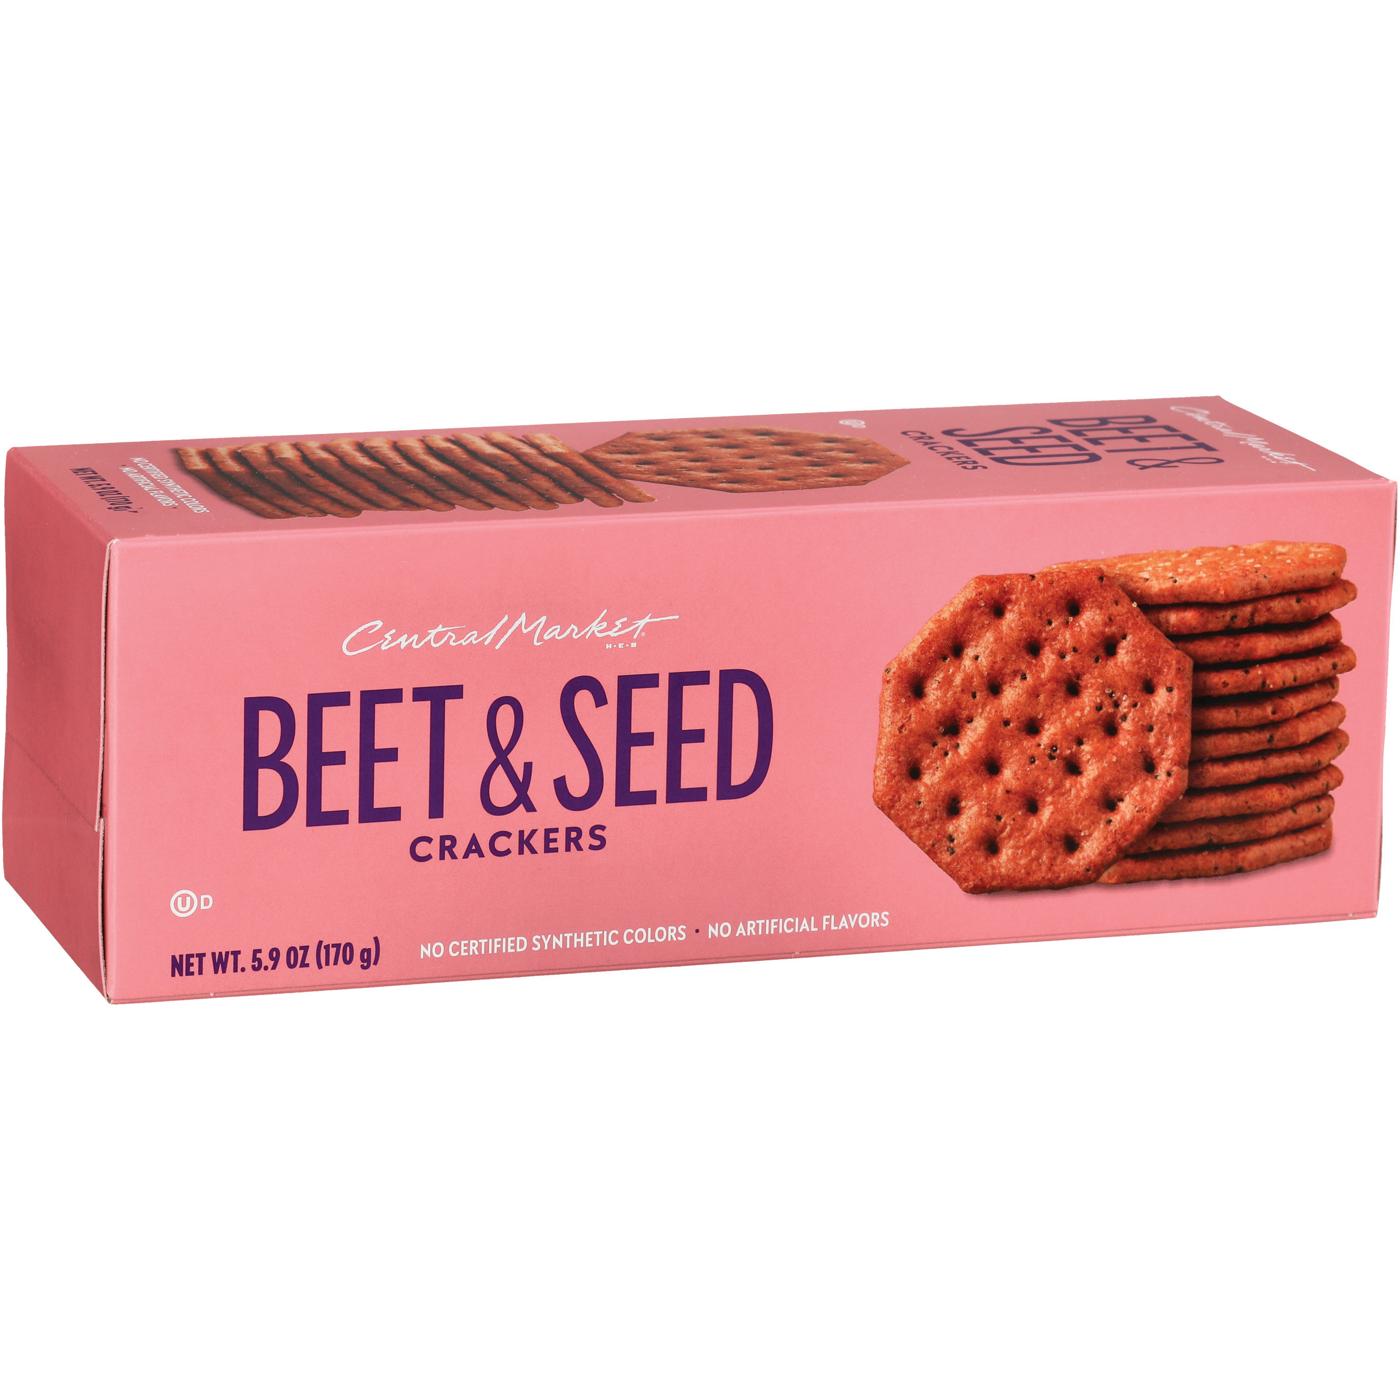 Central Market Beet & Seed Crackers; image 2 of 2